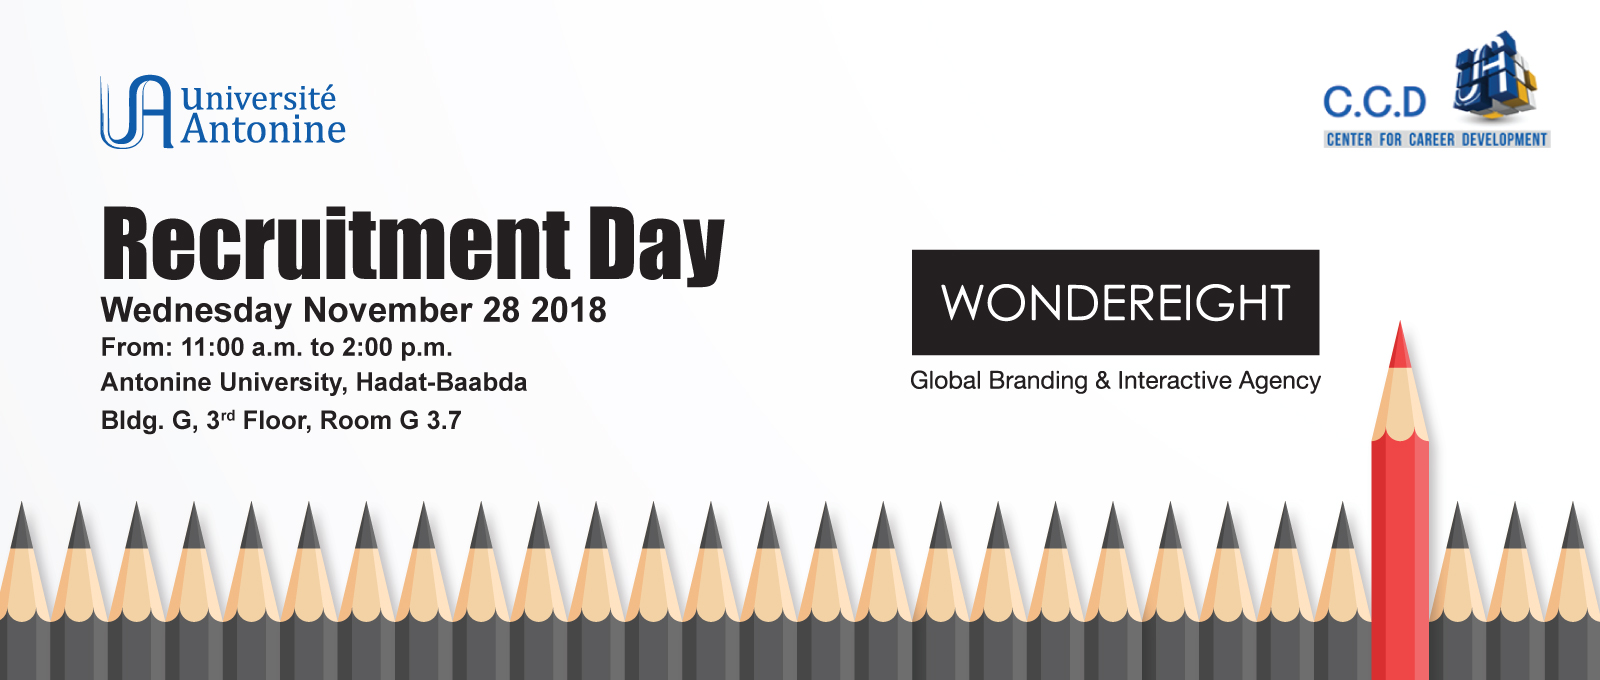 WONDEREIGHT Recruitment Day organized by the UA Center for Career Development